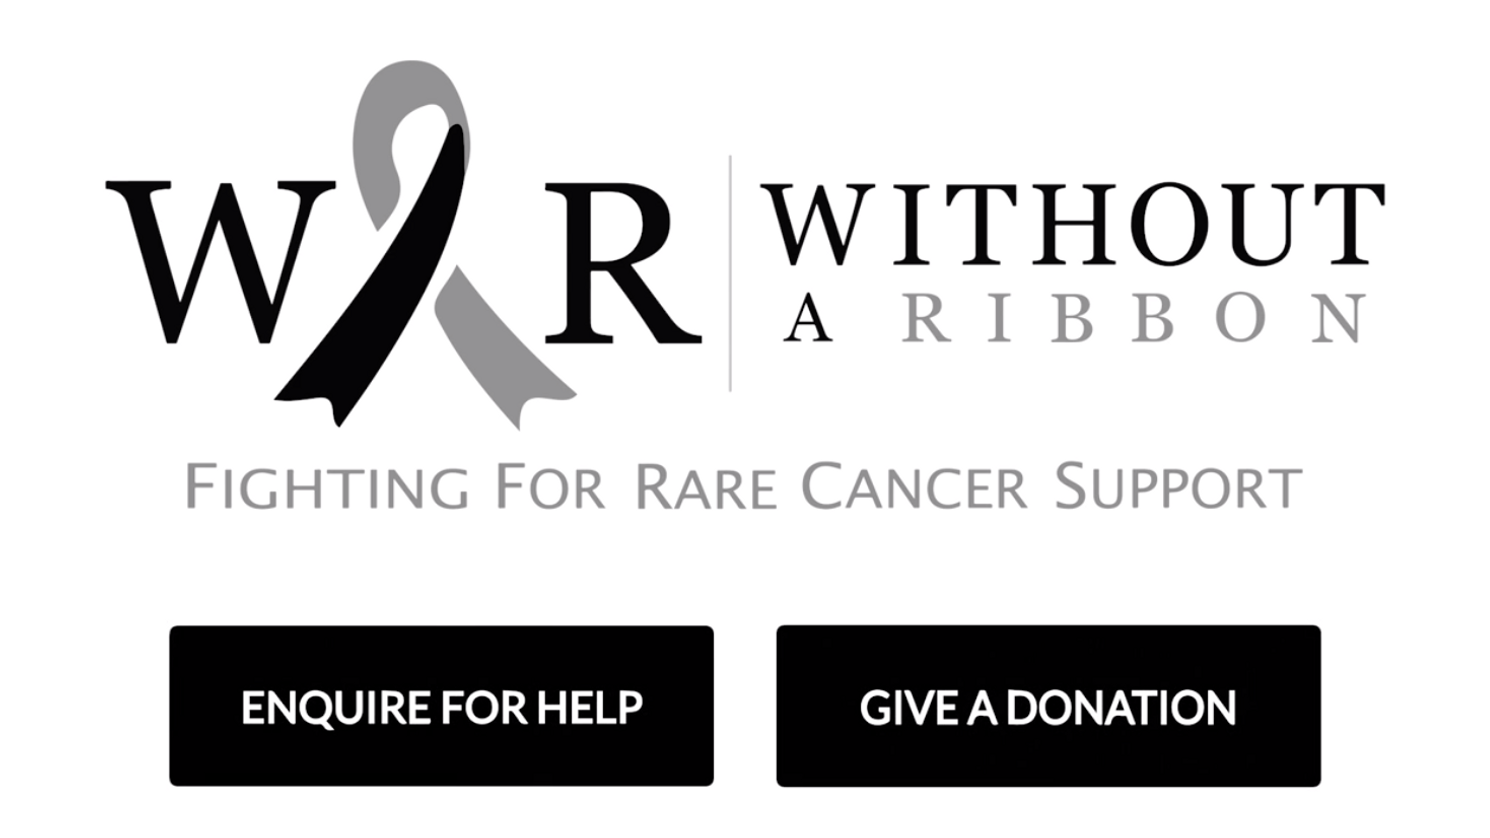 Without A Ribbon. Cancer support promotional video